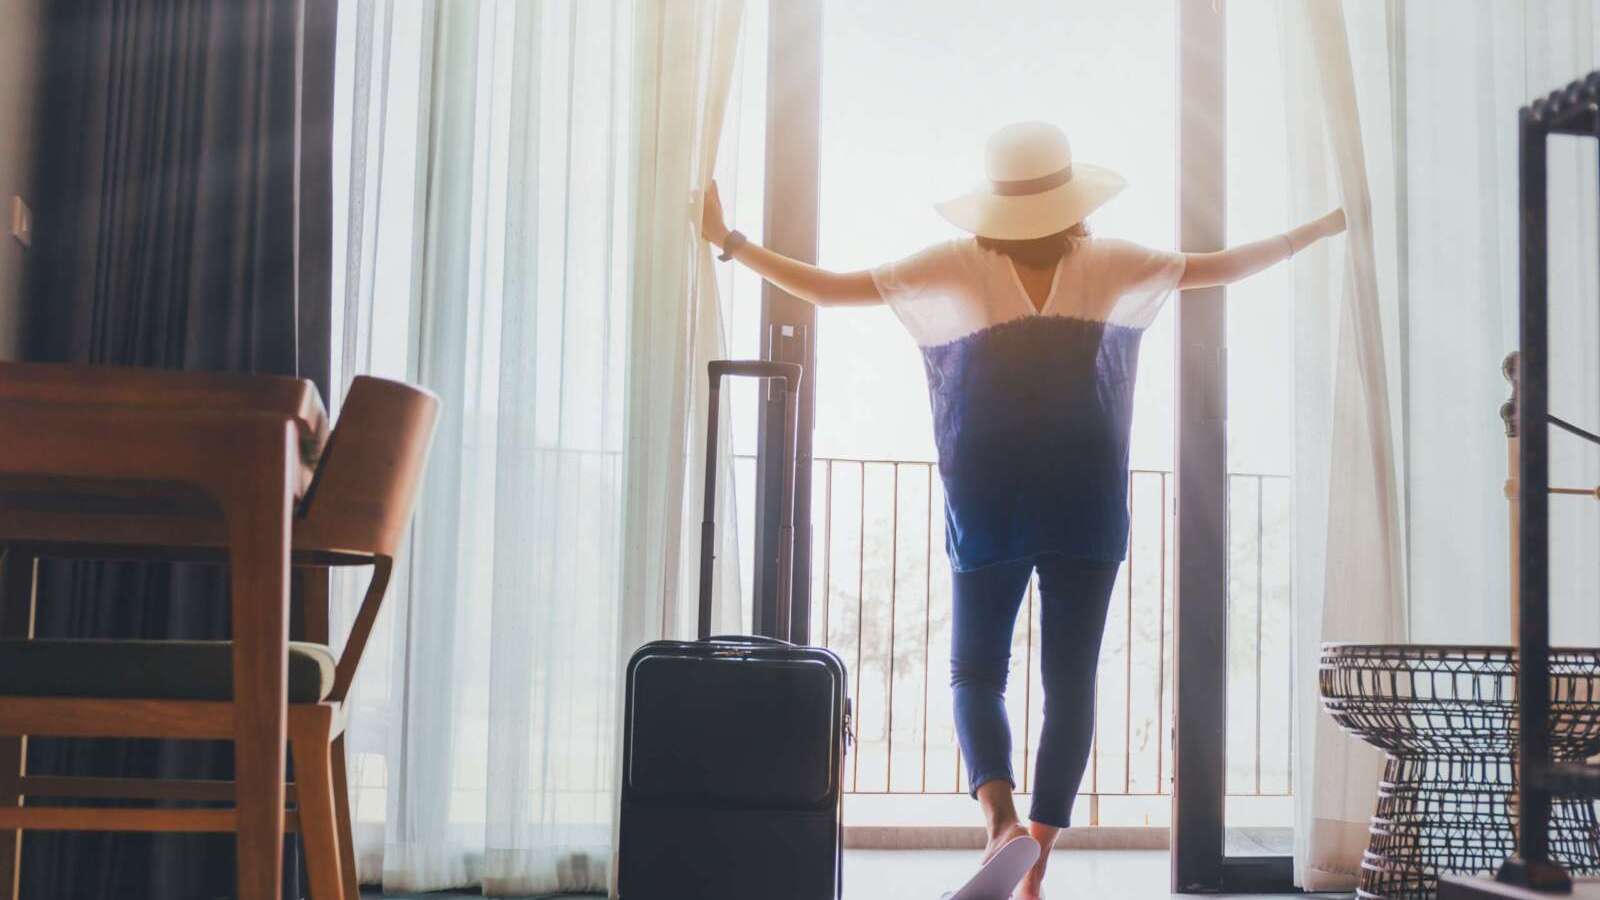 Asian women are staying in a hotel room with luggage.Open the curtain and  door in the room looking to outside view.Travel in holidays concept.Vintage tone.